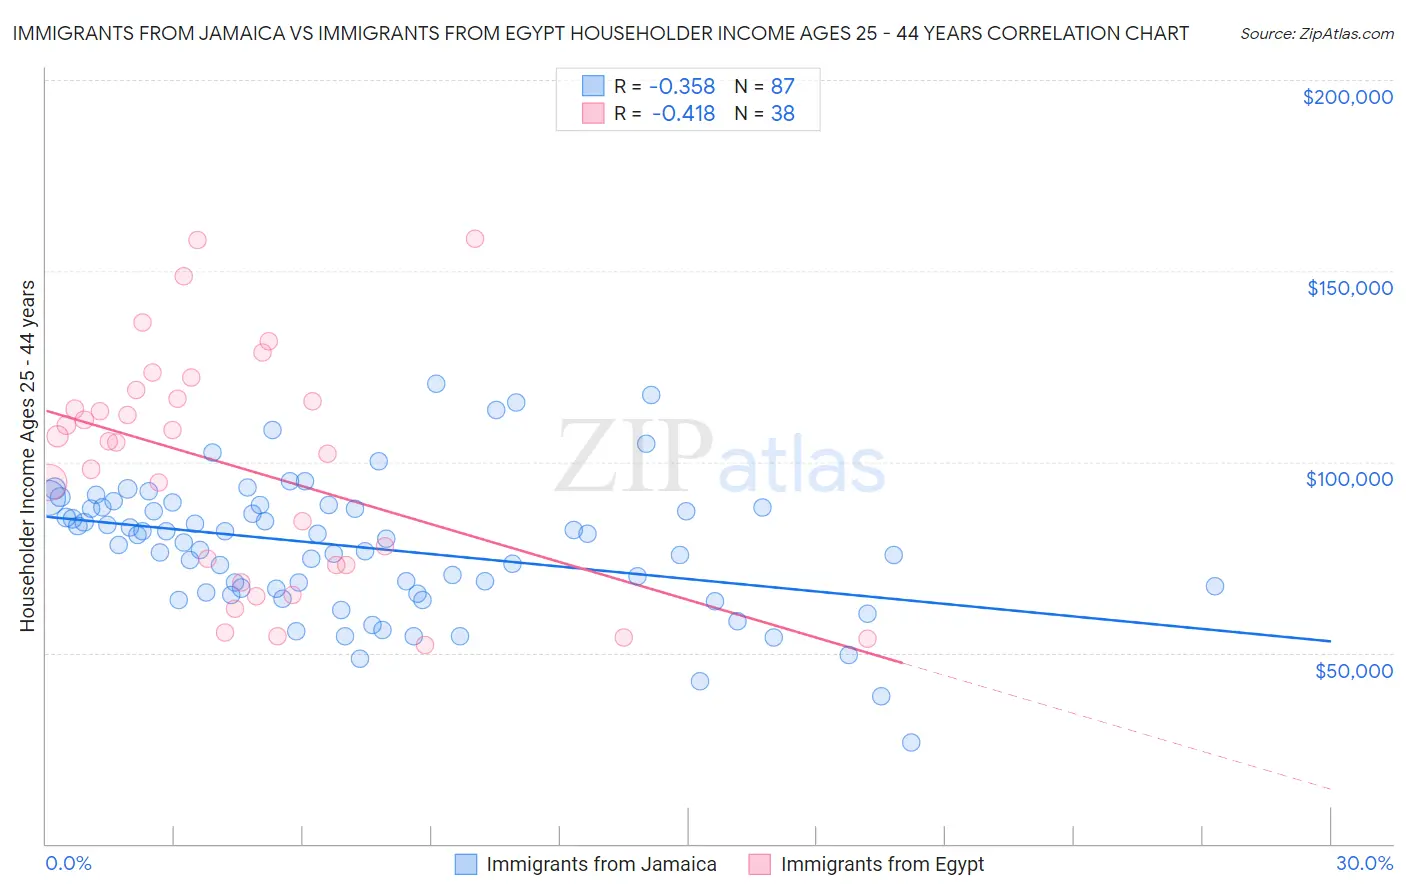 Immigrants from Jamaica vs Immigrants from Egypt Householder Income Ages 25 - 44 years